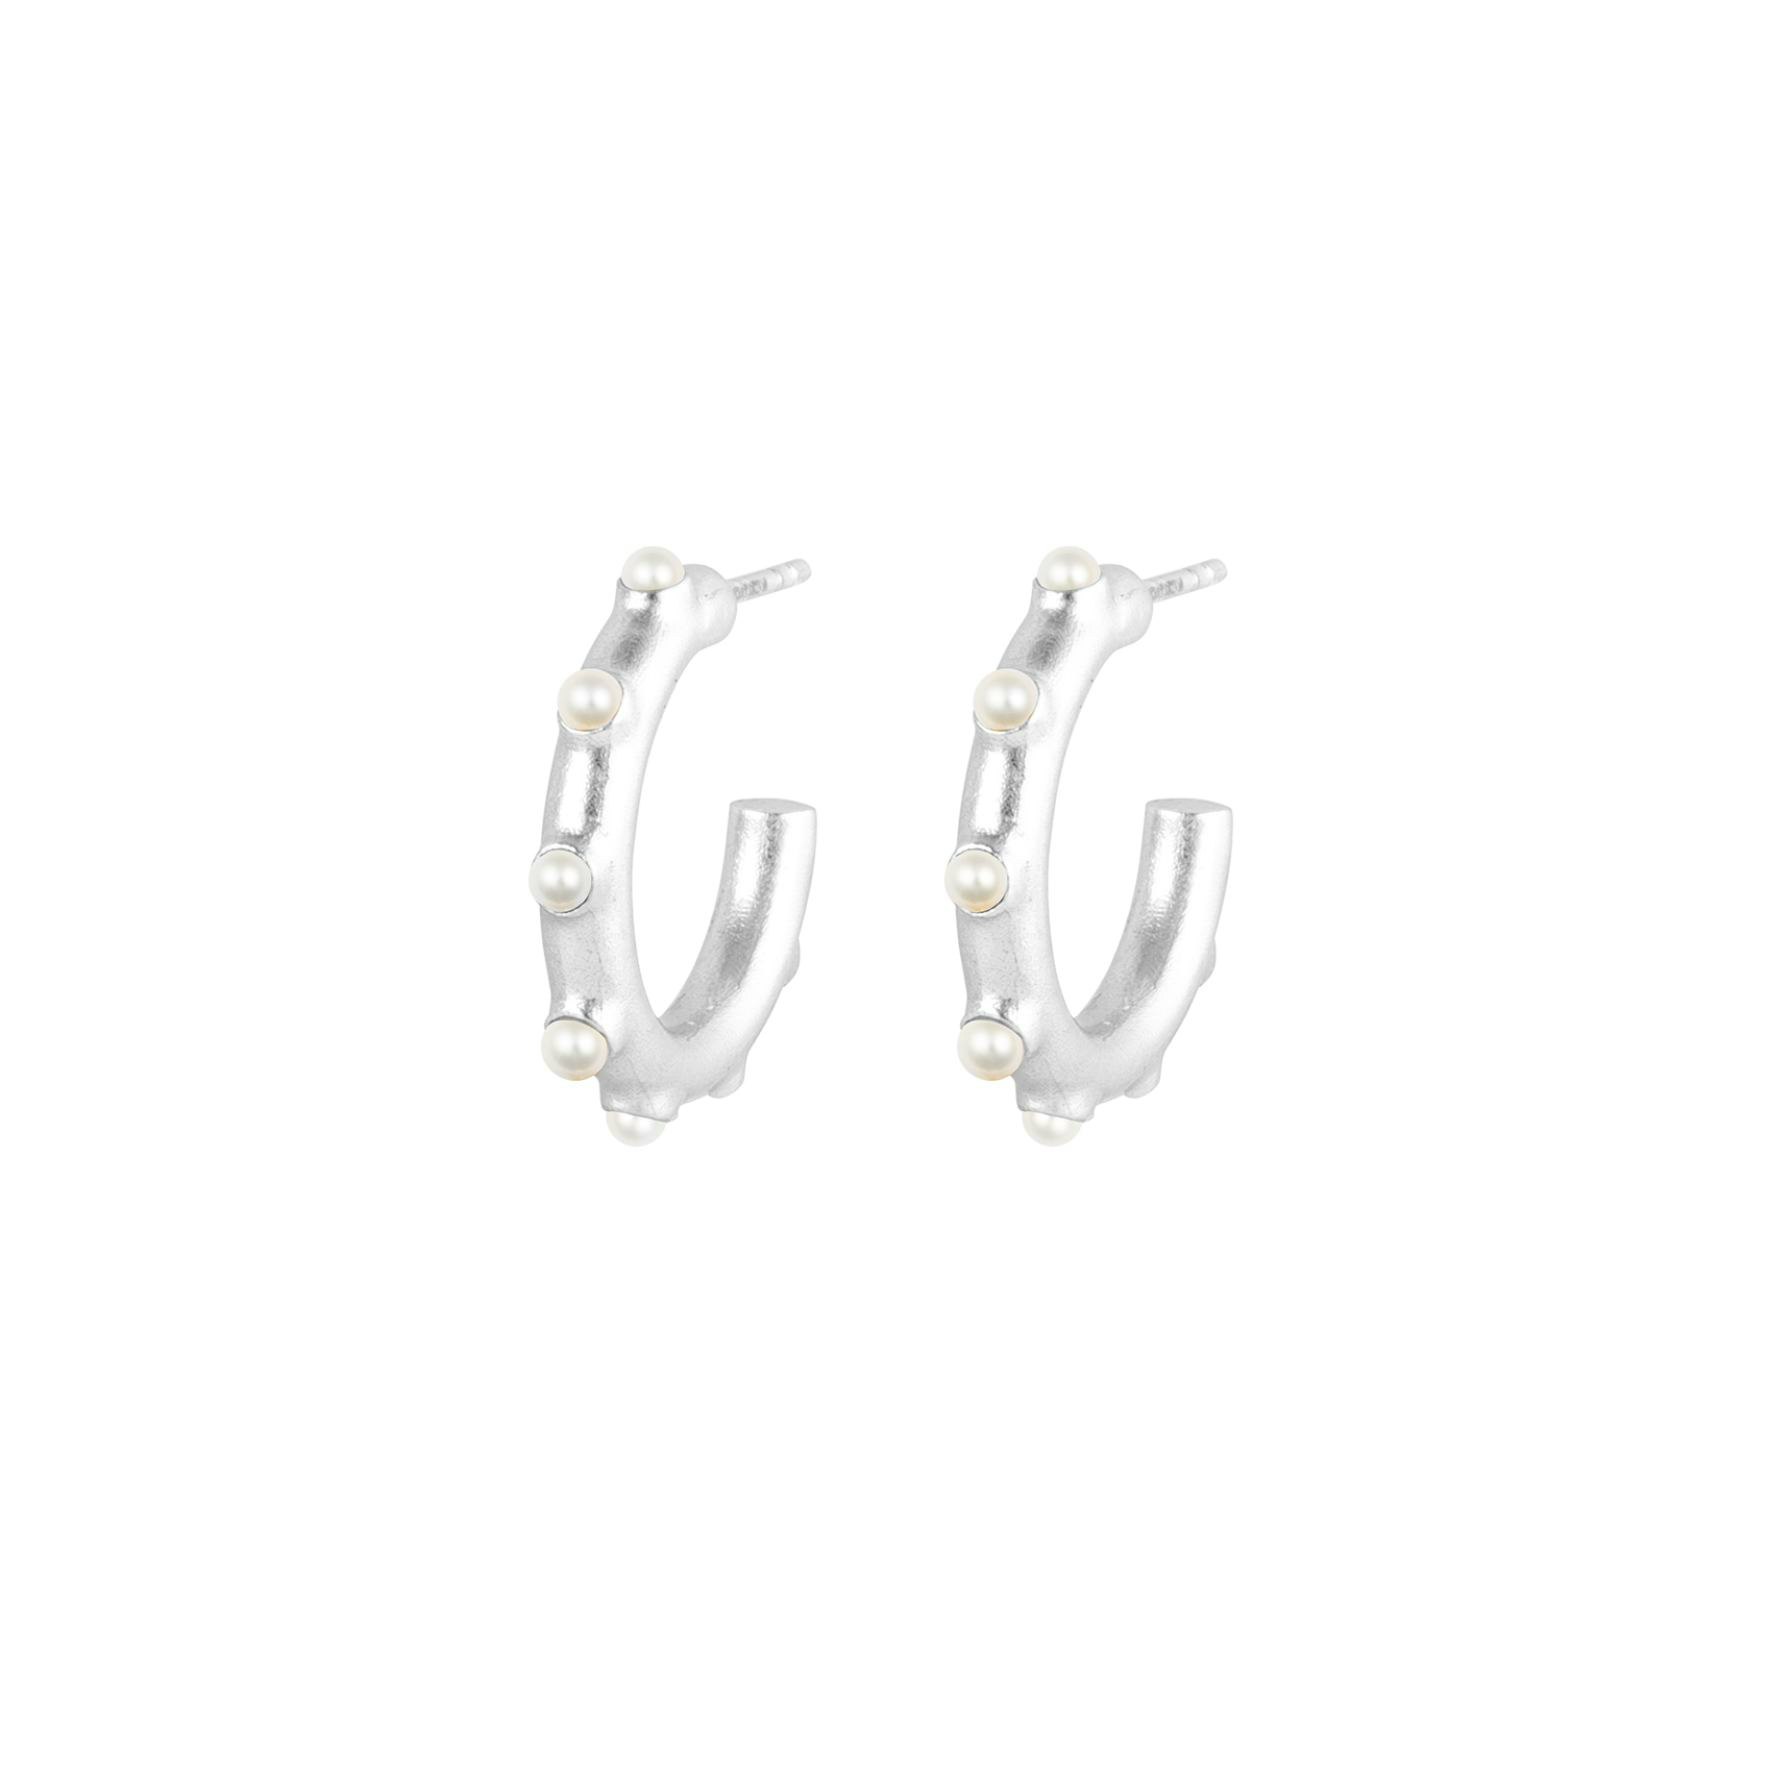 Trace Of Venus Earrings von House Of Vincent in Silber Sterling 925